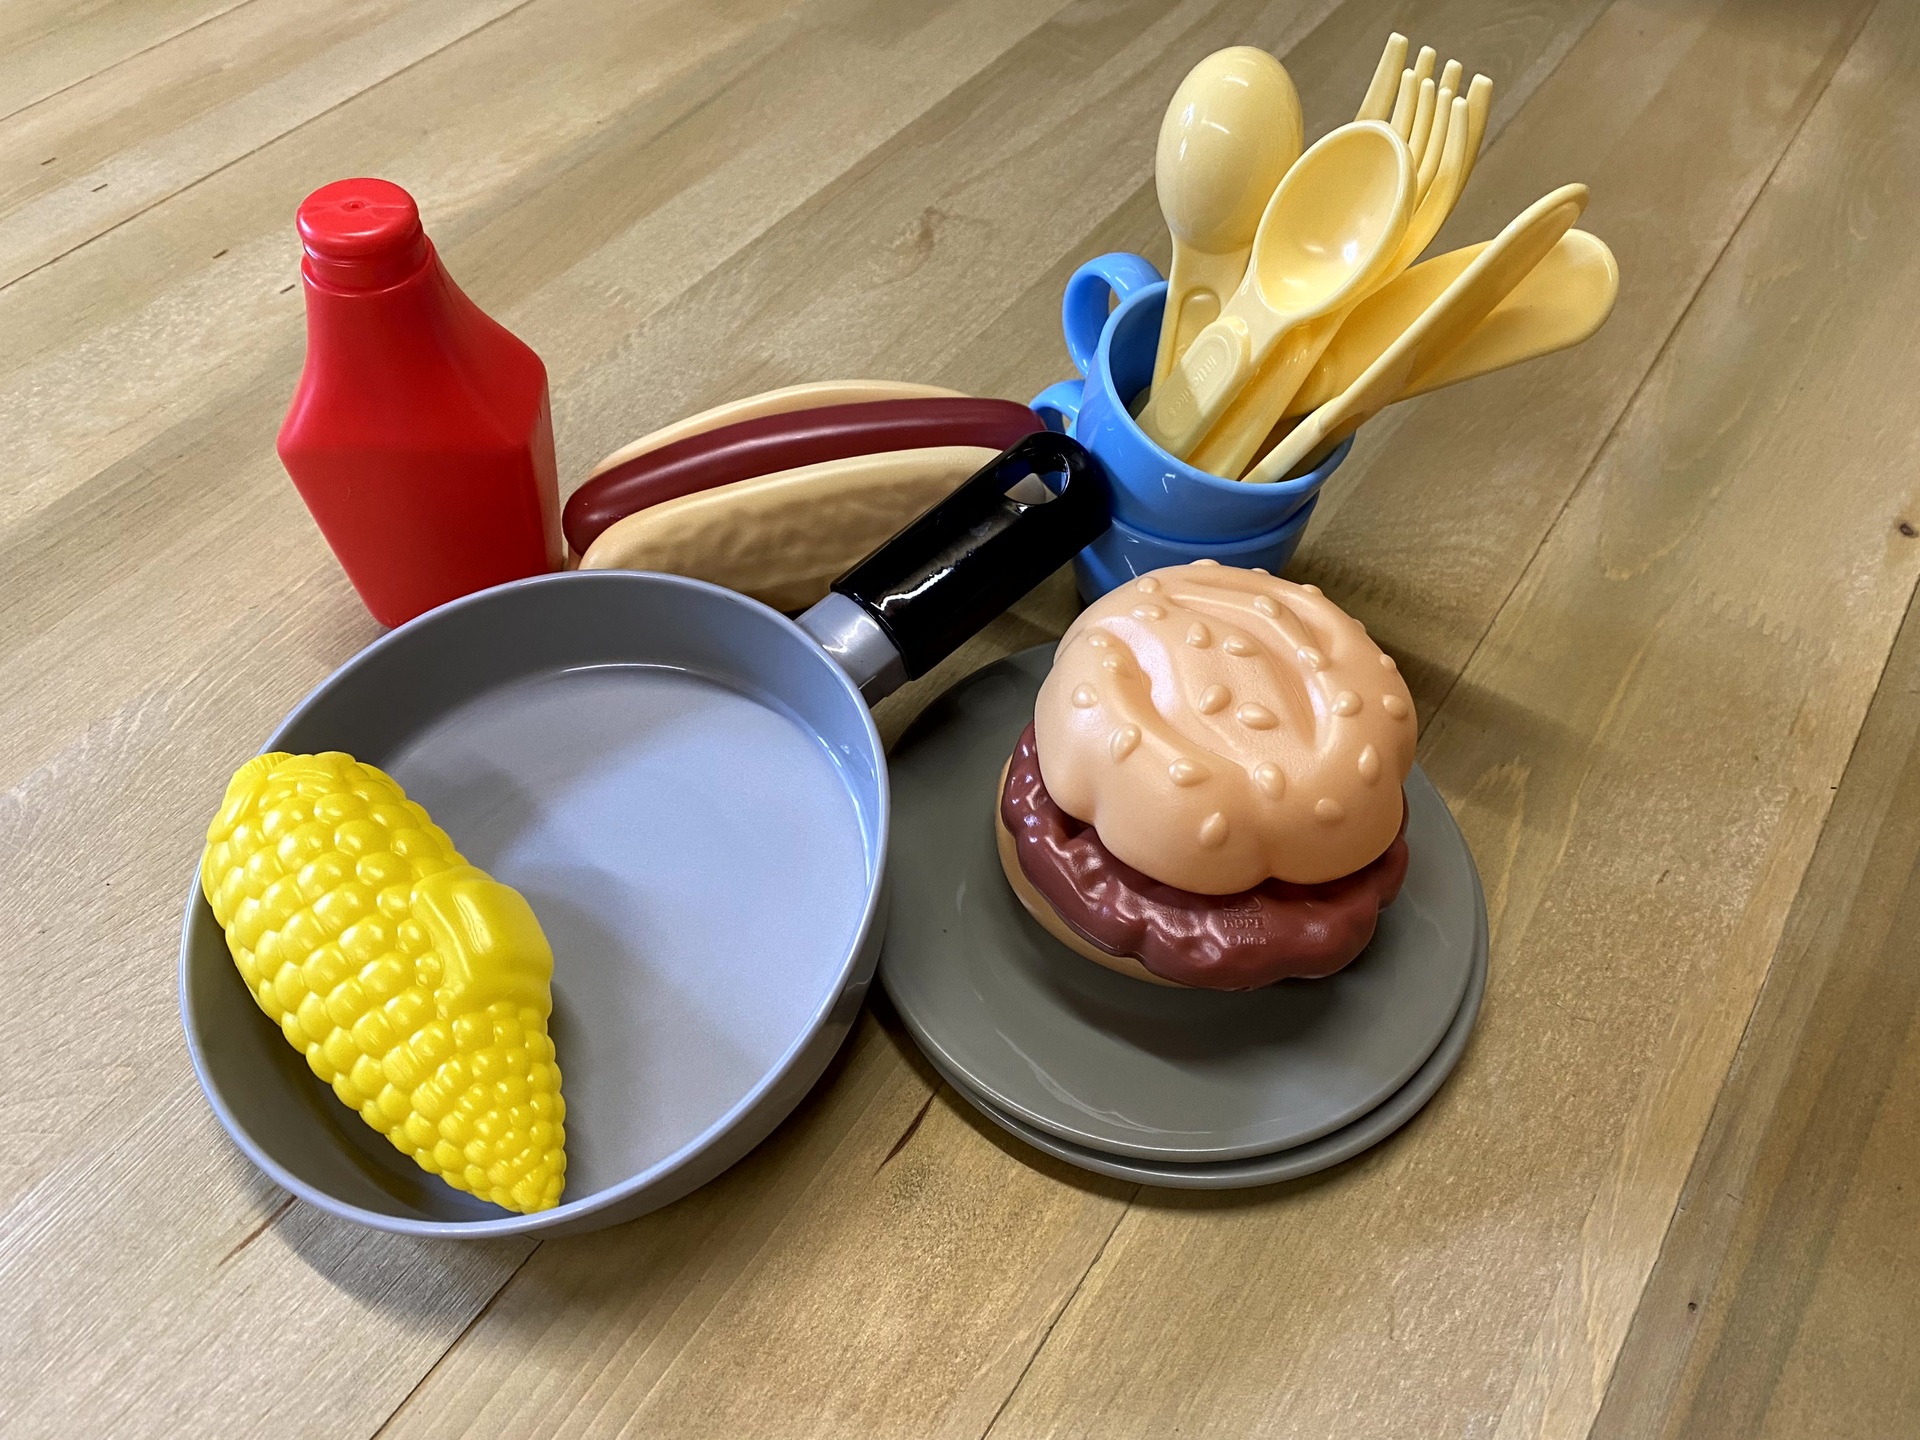 Food Accessory Pack includes Hotdog, Burger/bun, corn, ketchup, 2 cups, frying pan, 2 plates, 2 knifes, forks, spoons. Image